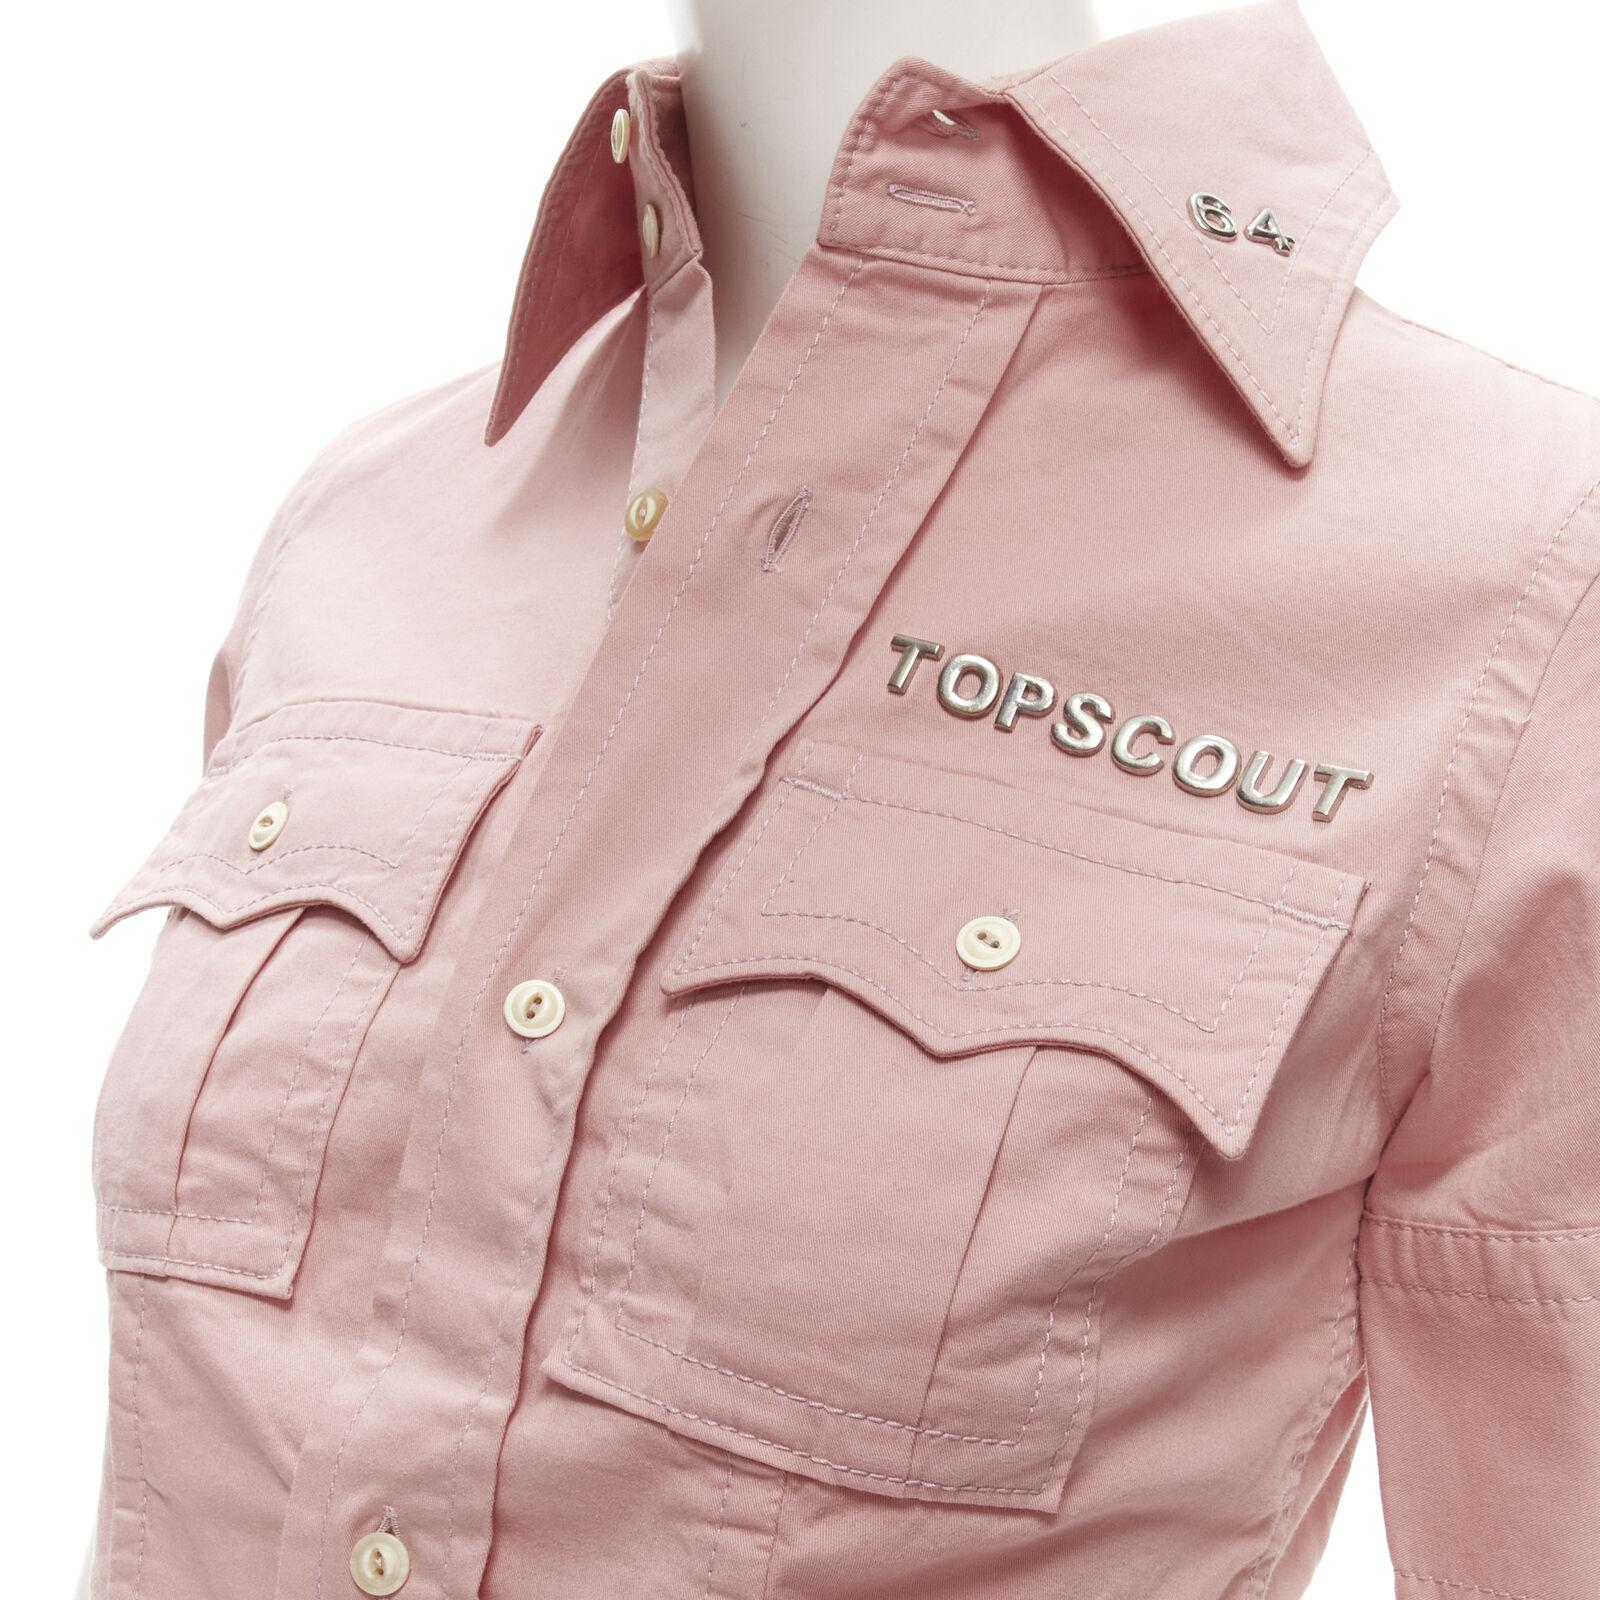 DSQUARED2 Vintage Topscout 1964 pink girl scout uniform shirt IT38 XS
Reference: ANWU/A01022
Brand: Dsquared2
Collection: Topscout
Material: Feels like cotton
Color: Pink, Silver
Pattern: Solid
Closure: Button
Extra Details: Silver-tone charm